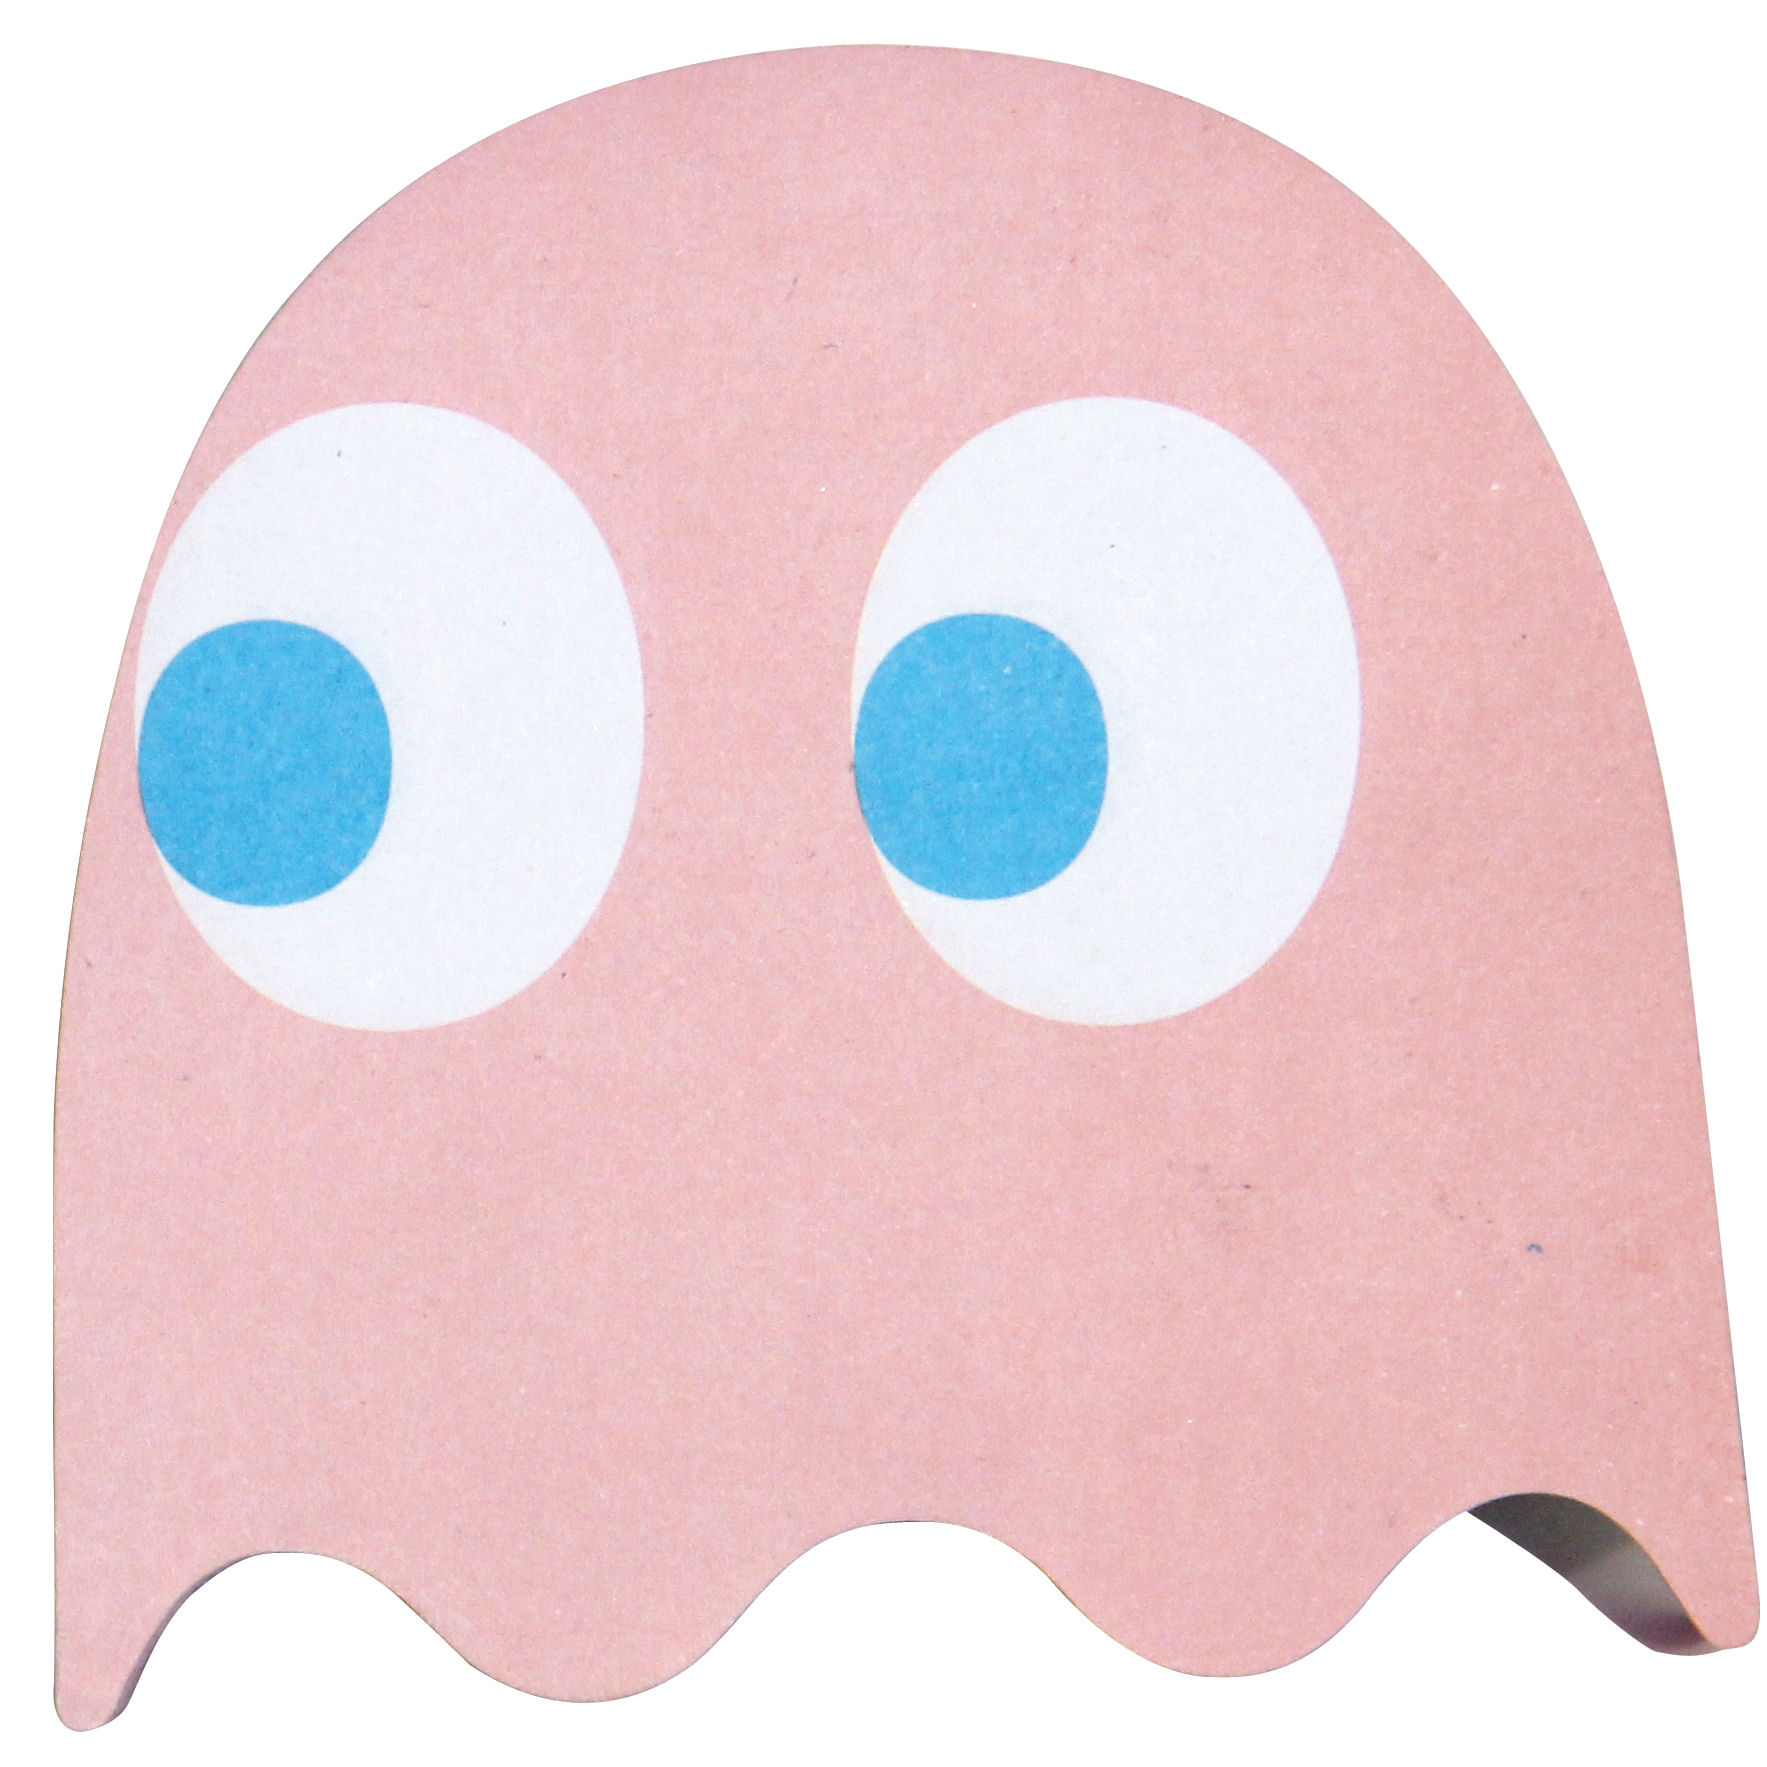 NEW PAC MAN GHOST STICKY NOTES POST IT NOVELTY PAD OFFICE RETRO ...